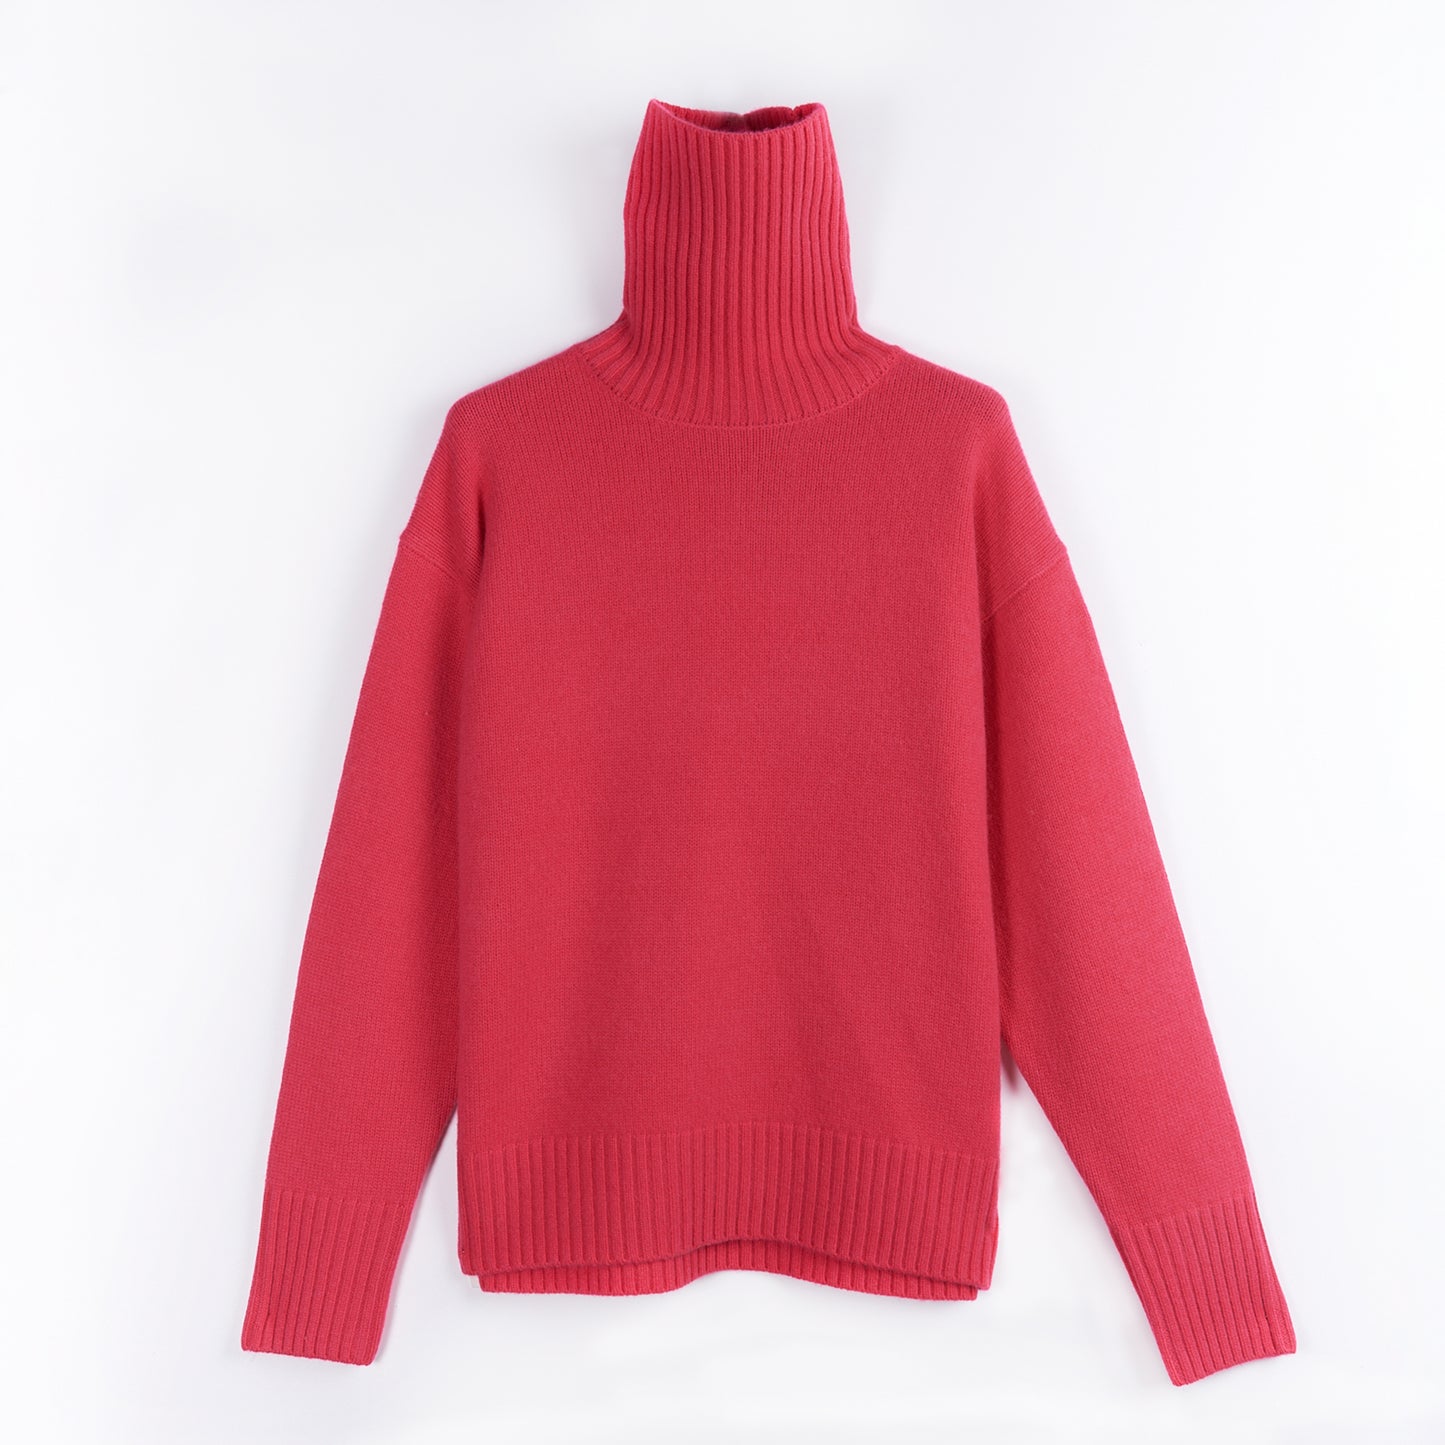 Jersey Cashmere knitted turtleneck